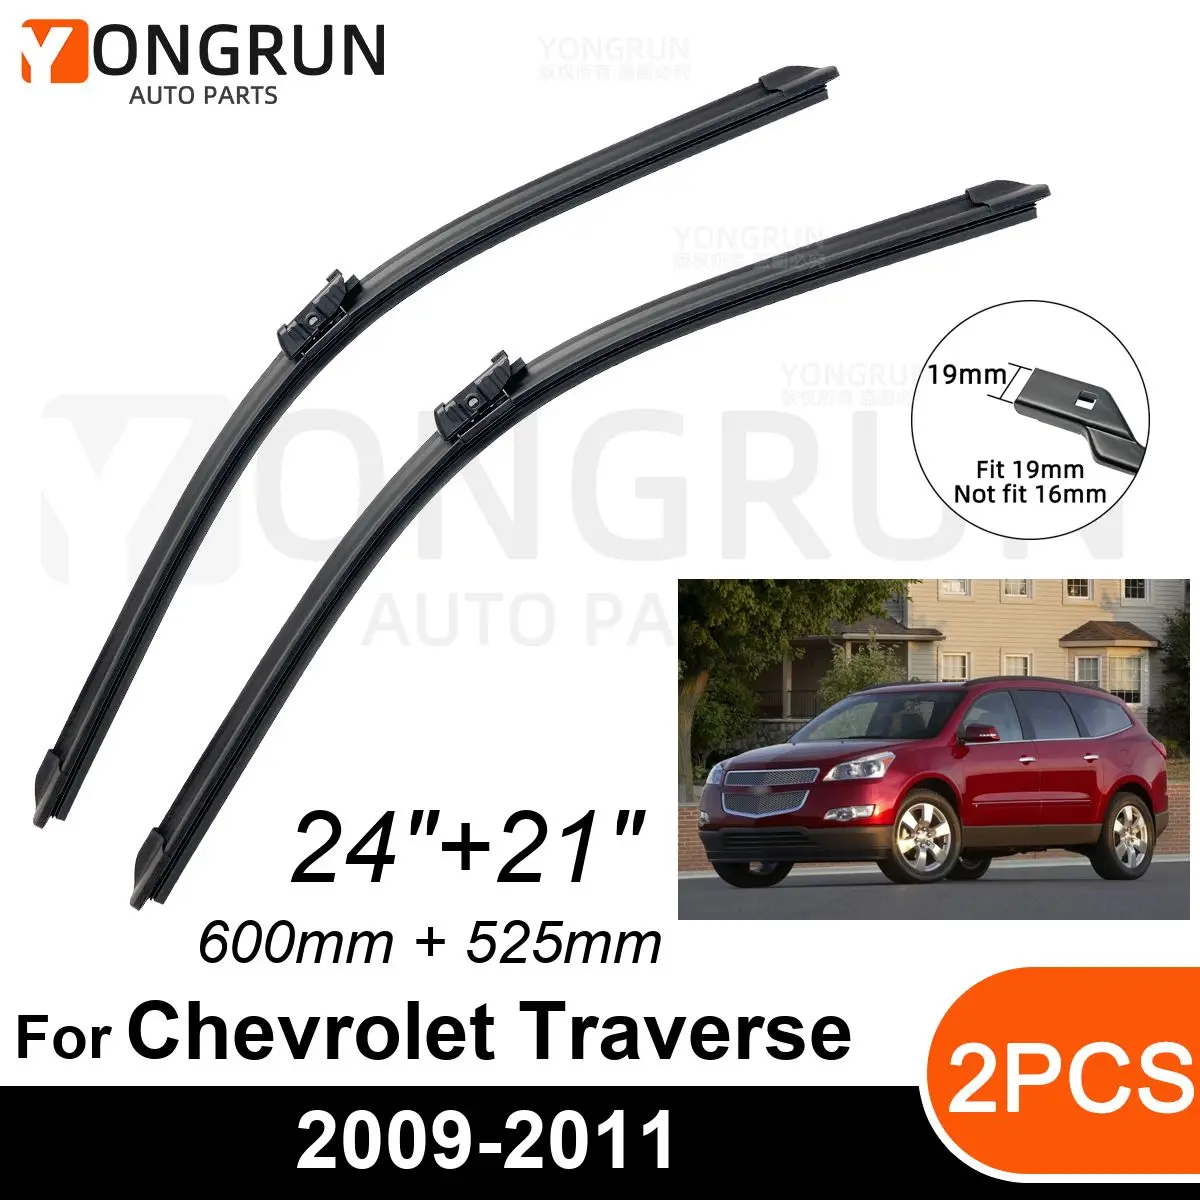 

Car Front Windshield Wipers For Chevrolet Traverse 2009-2011 Wiper Blade Rubber 24"+21" Car Windshield Windscreen Accessories